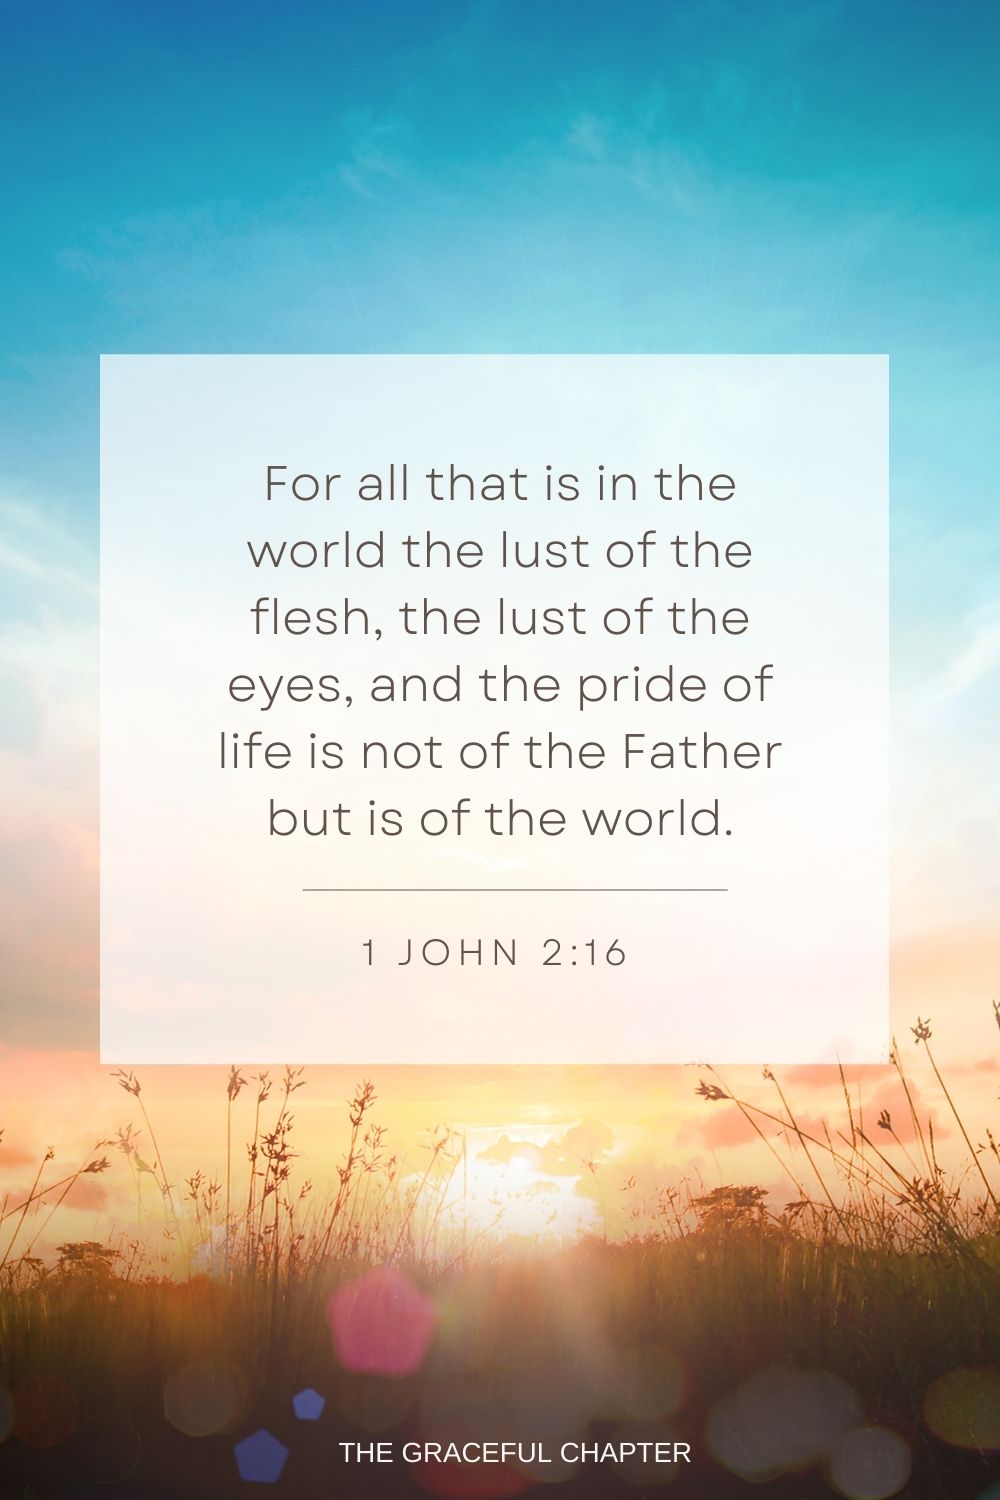 For all that is in the world the lust of the flesh, the lust of the eyes, and the pride of life is not of the Father but is of the world. 1 John 2:16